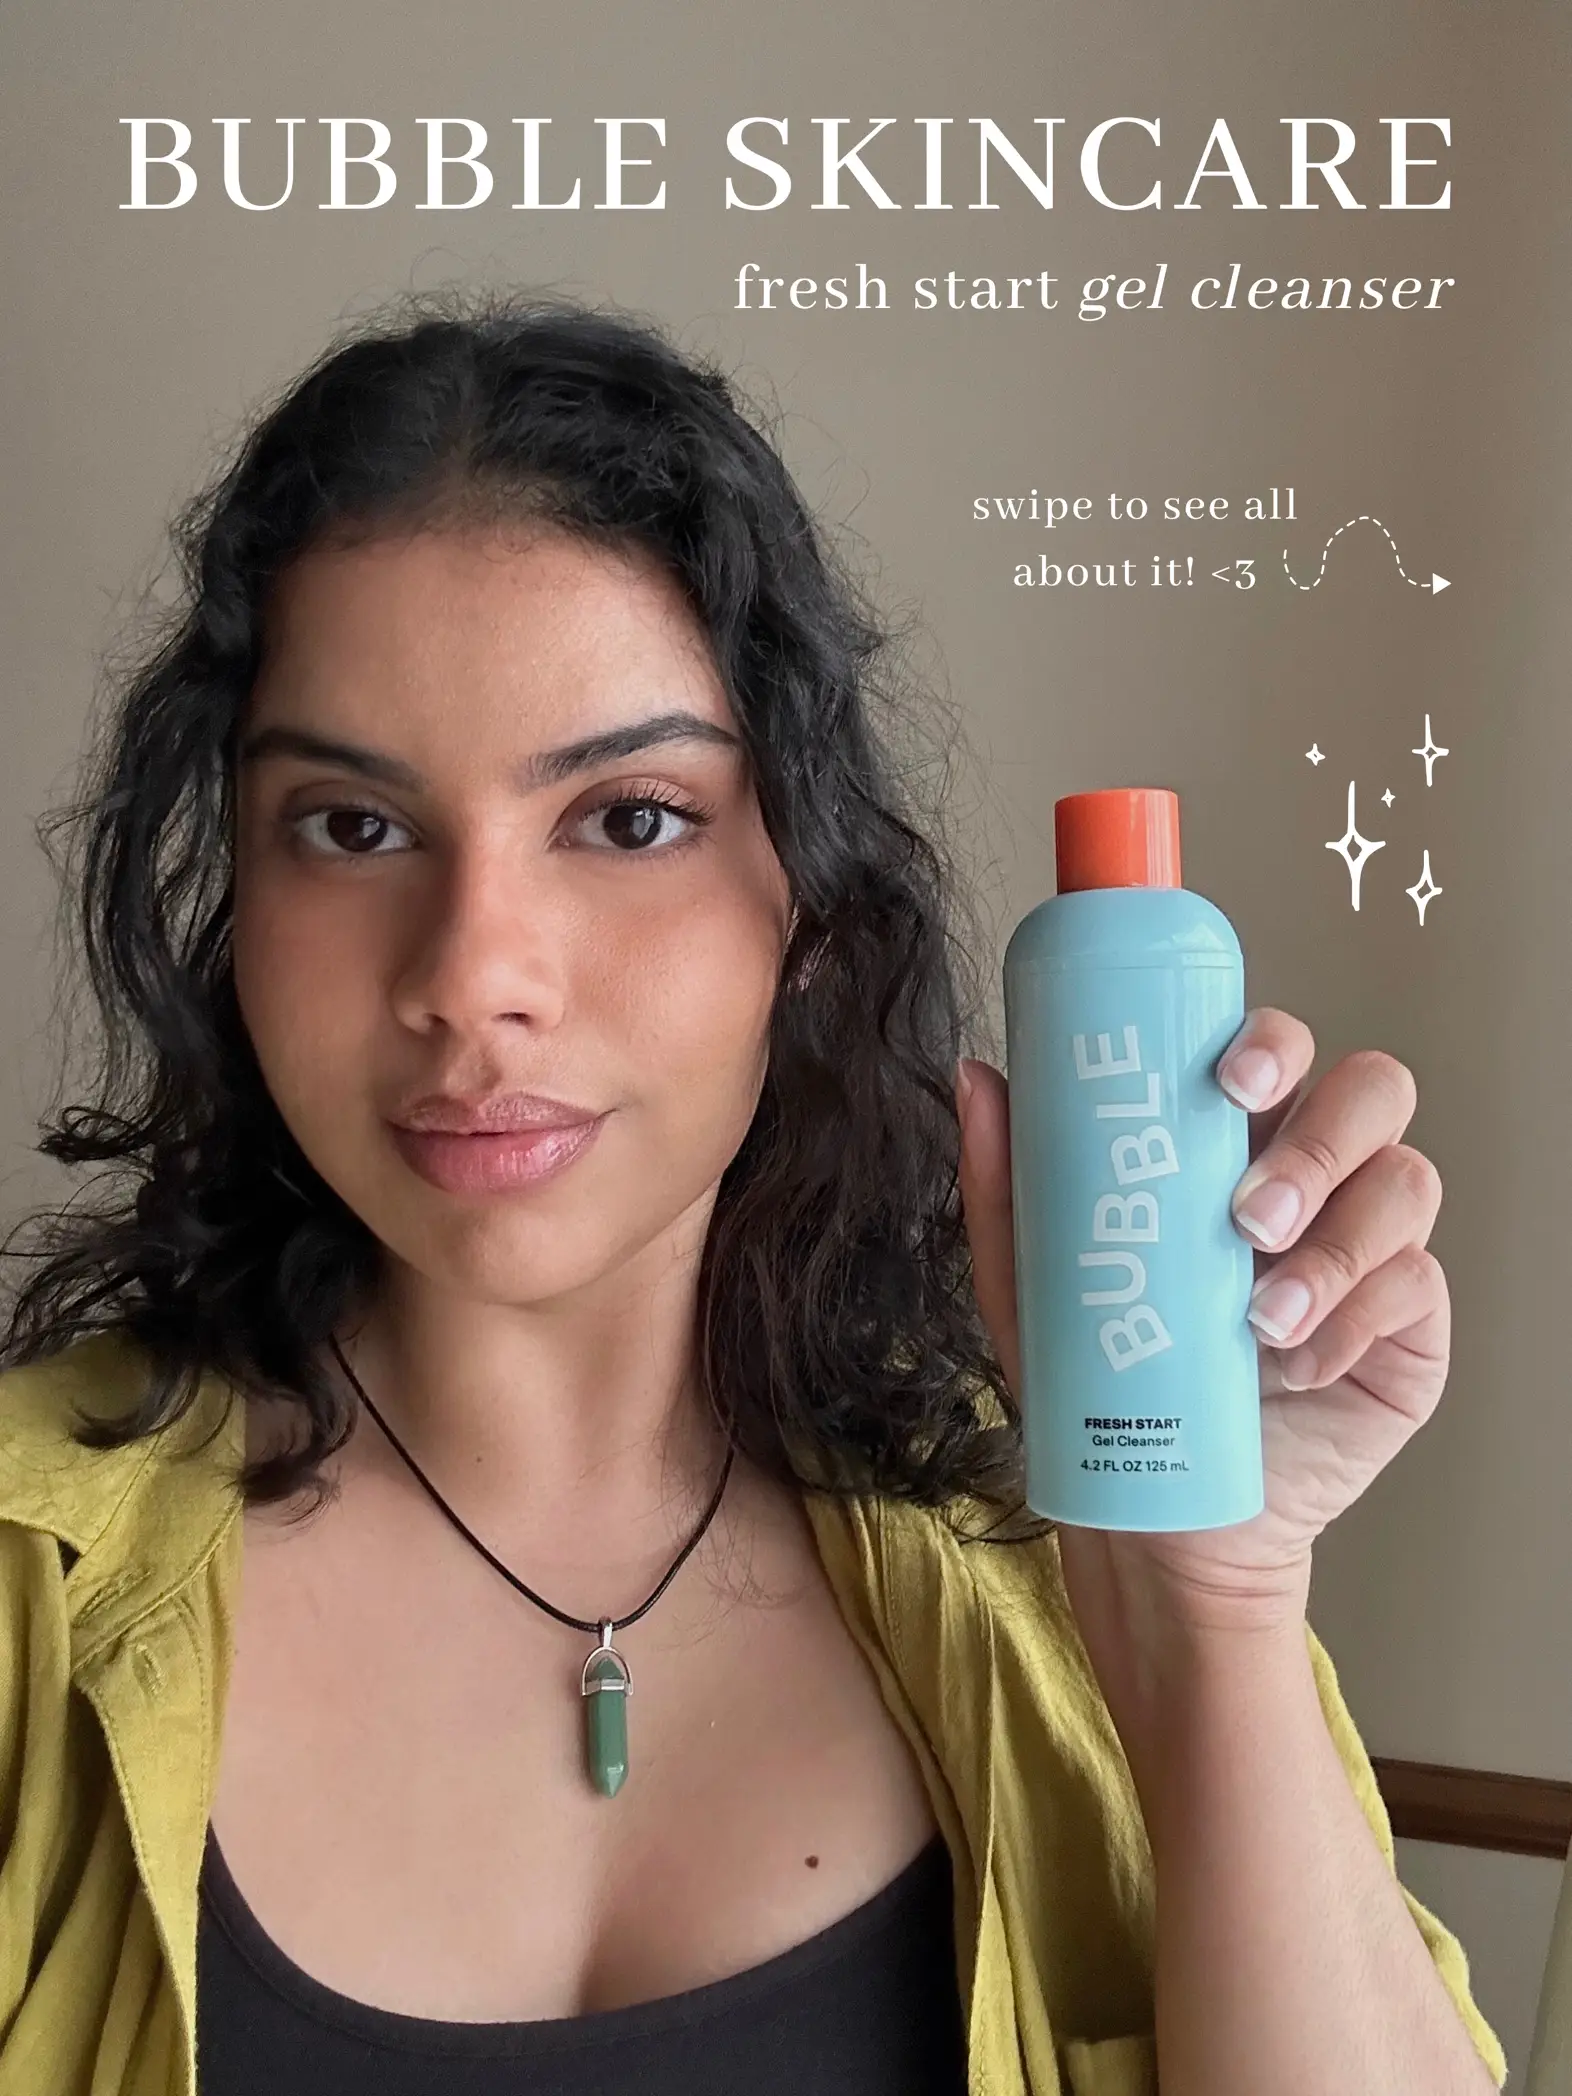  Bubble Skincare Fresh Start Gel Cleanser - PHA + Caffeine for  Skin Calming, Texture + Acne Support - Sensitive Skin Friendly Deep Pore  Facial Cleanser (125ml) : Beauty & Personal Care